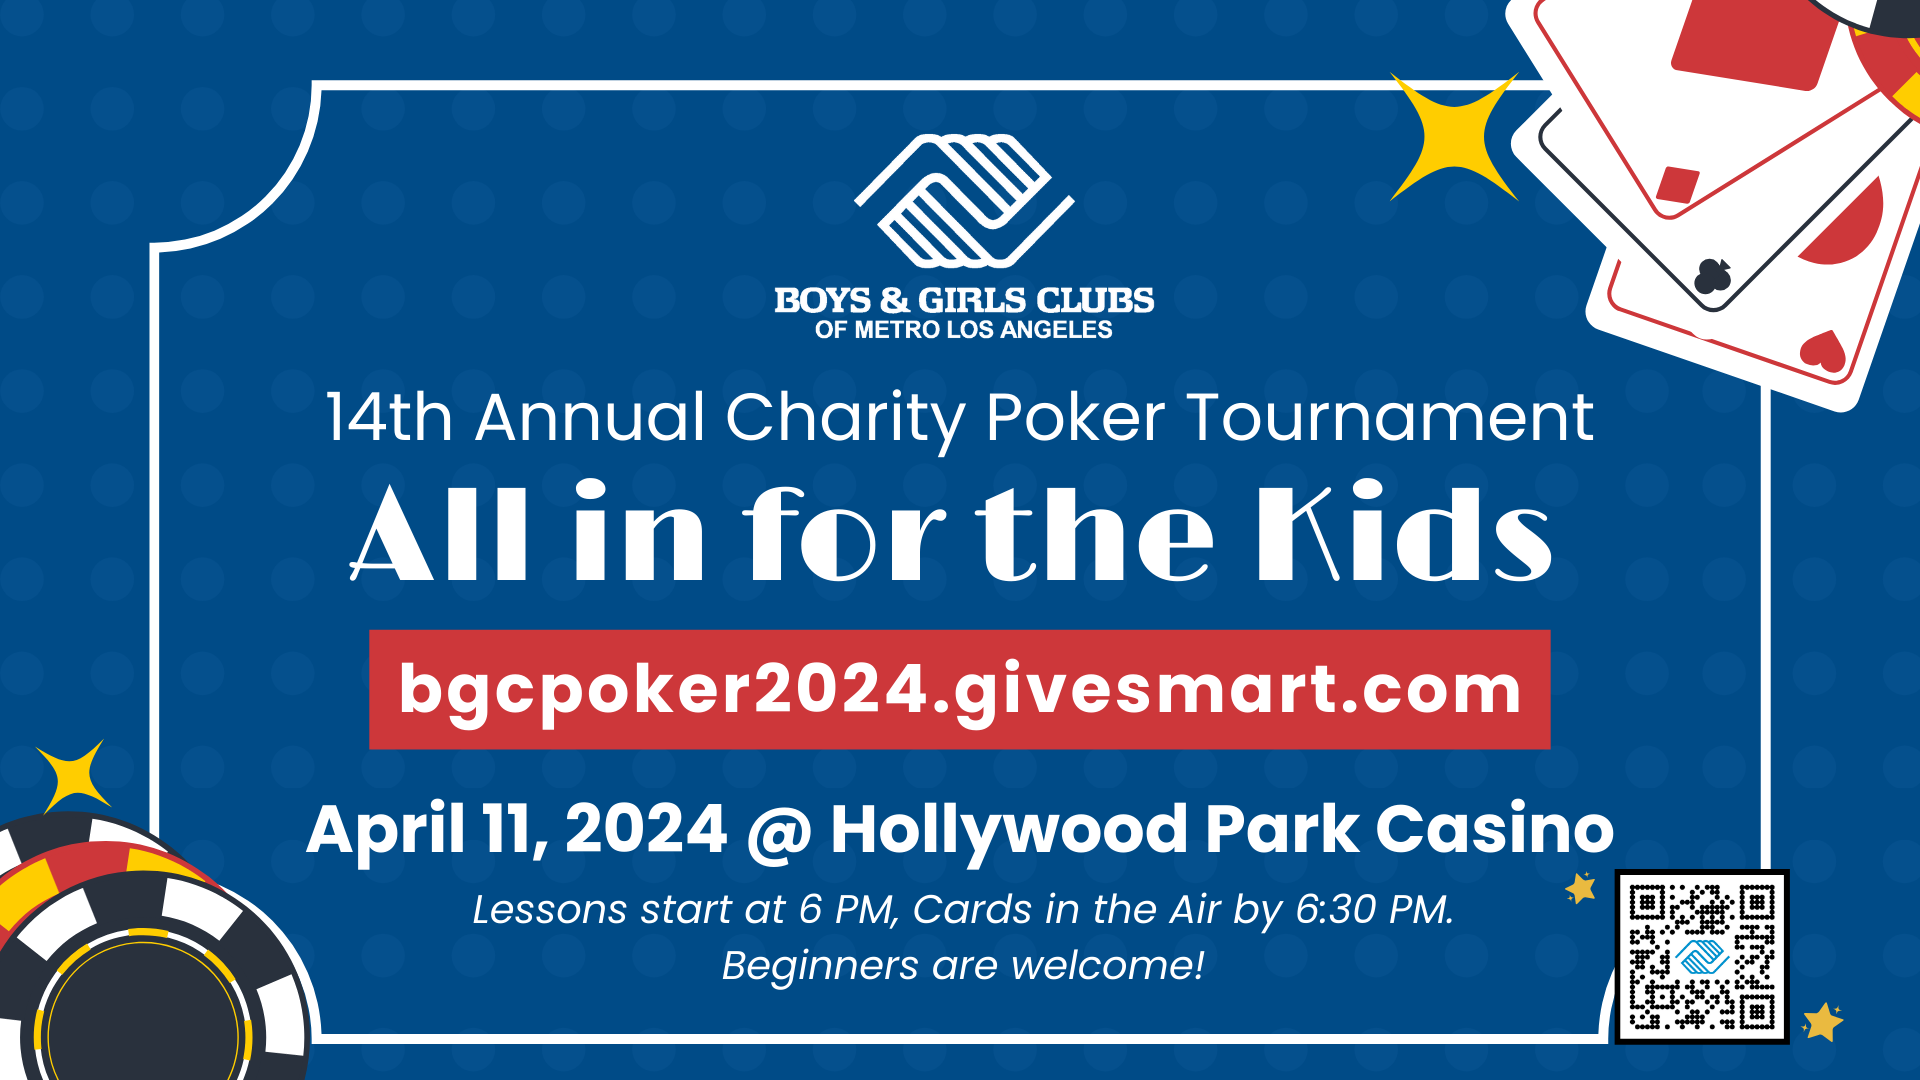 Boys & Girls CLubs of Metro Los Angeles 14th Annual Charity Poker Tournament 